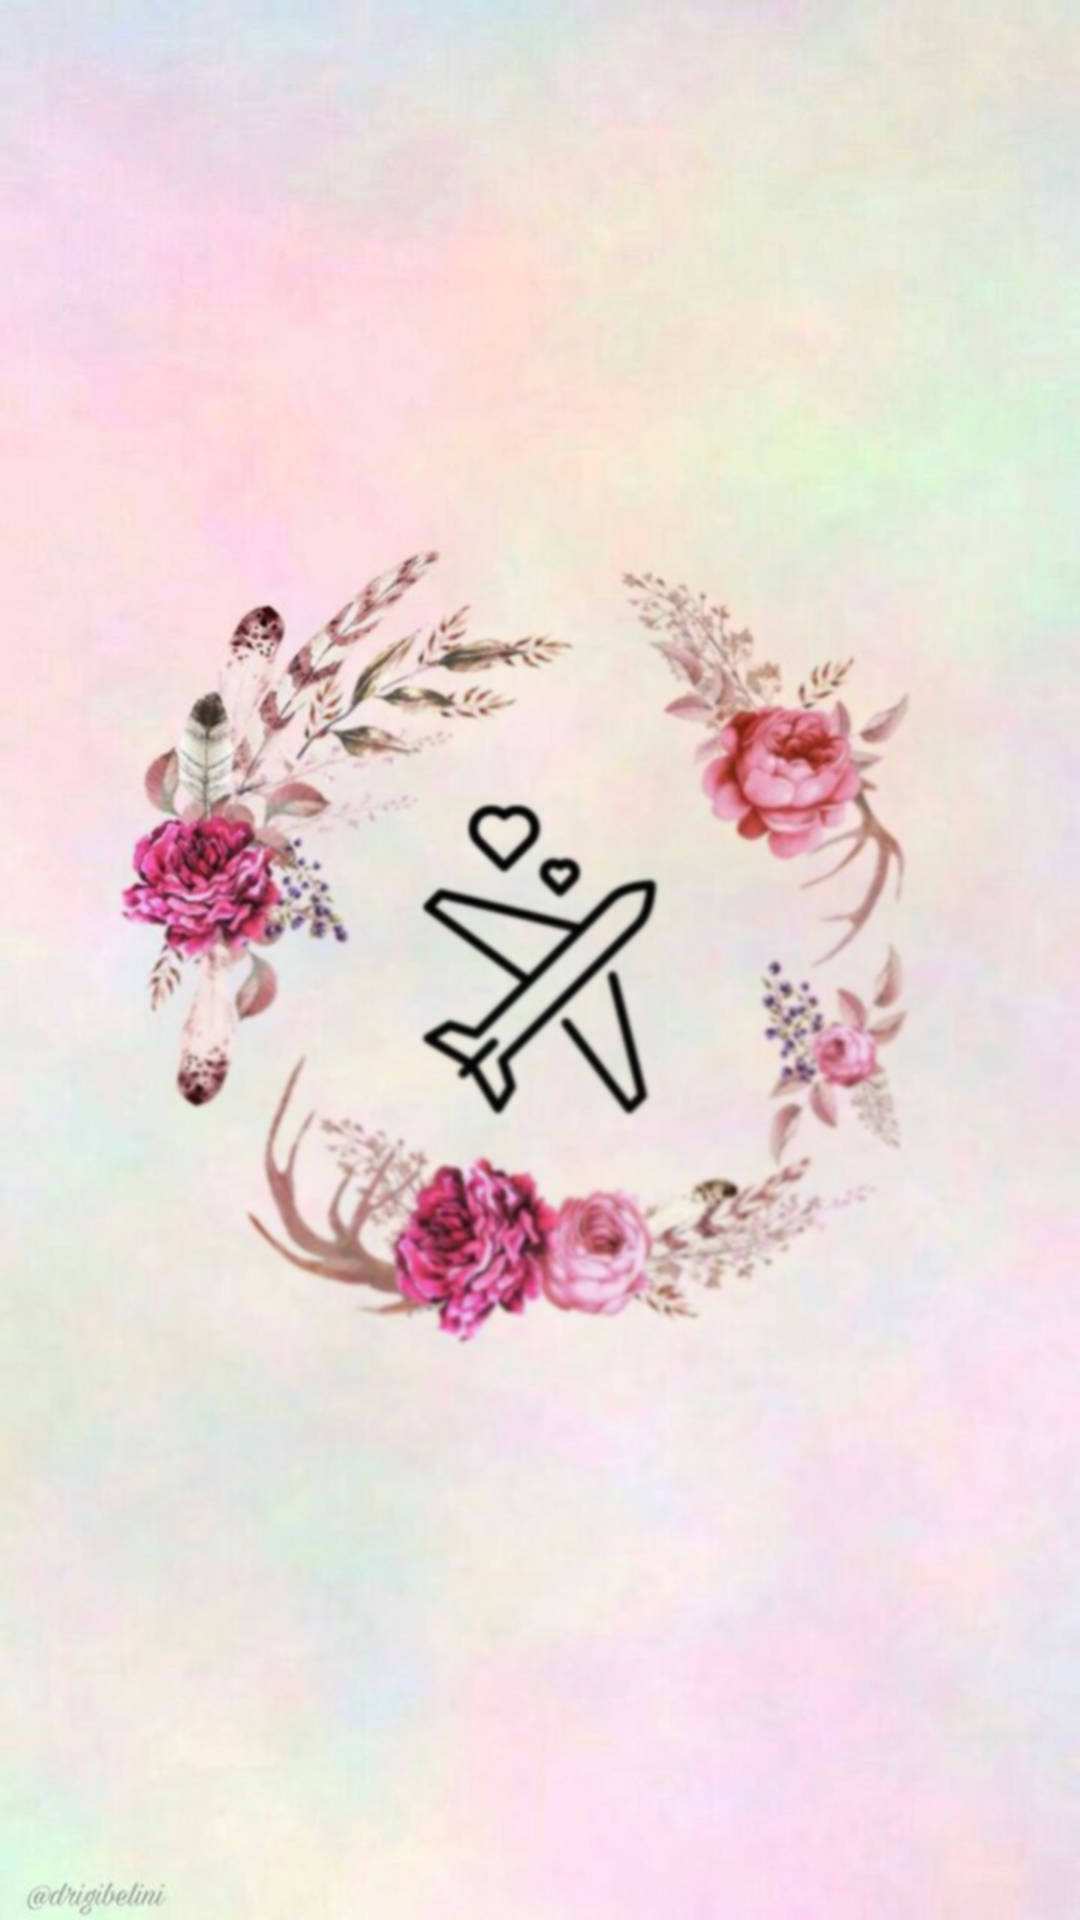 Instagram Story Plane With Wreath Wallpaper